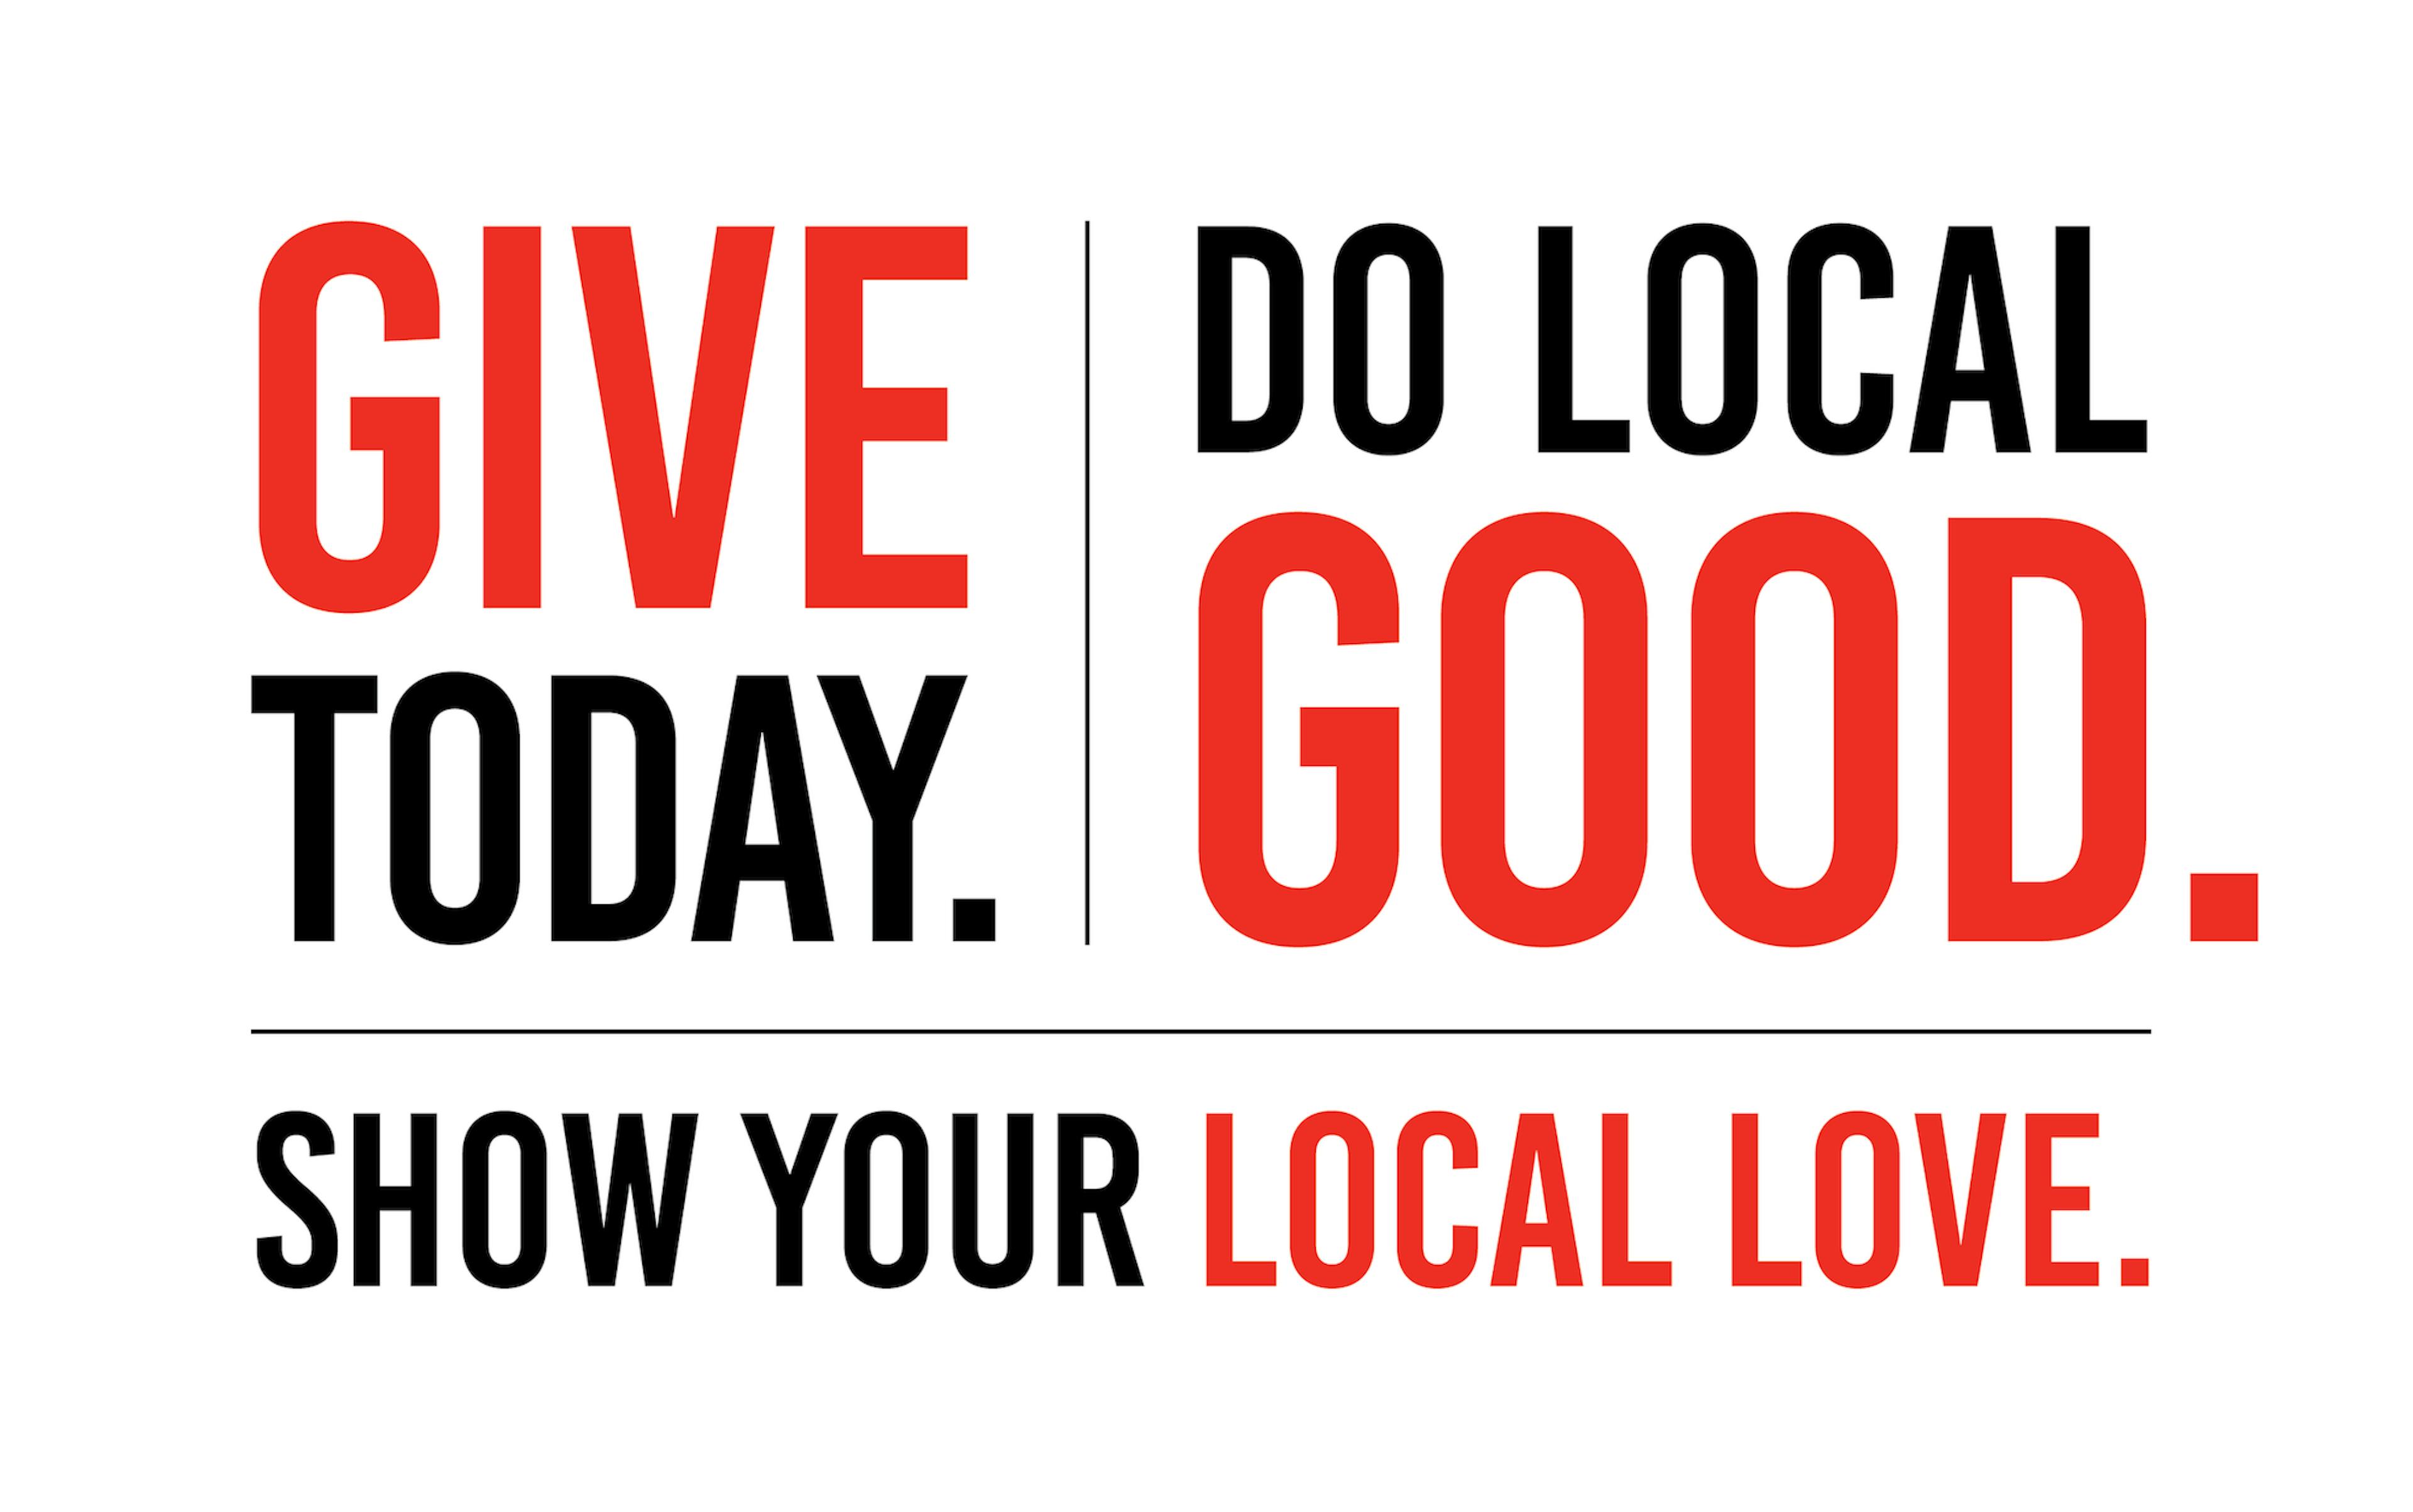 A blog banner for United Way reading 'Give today. Do local good. Show your local love.'